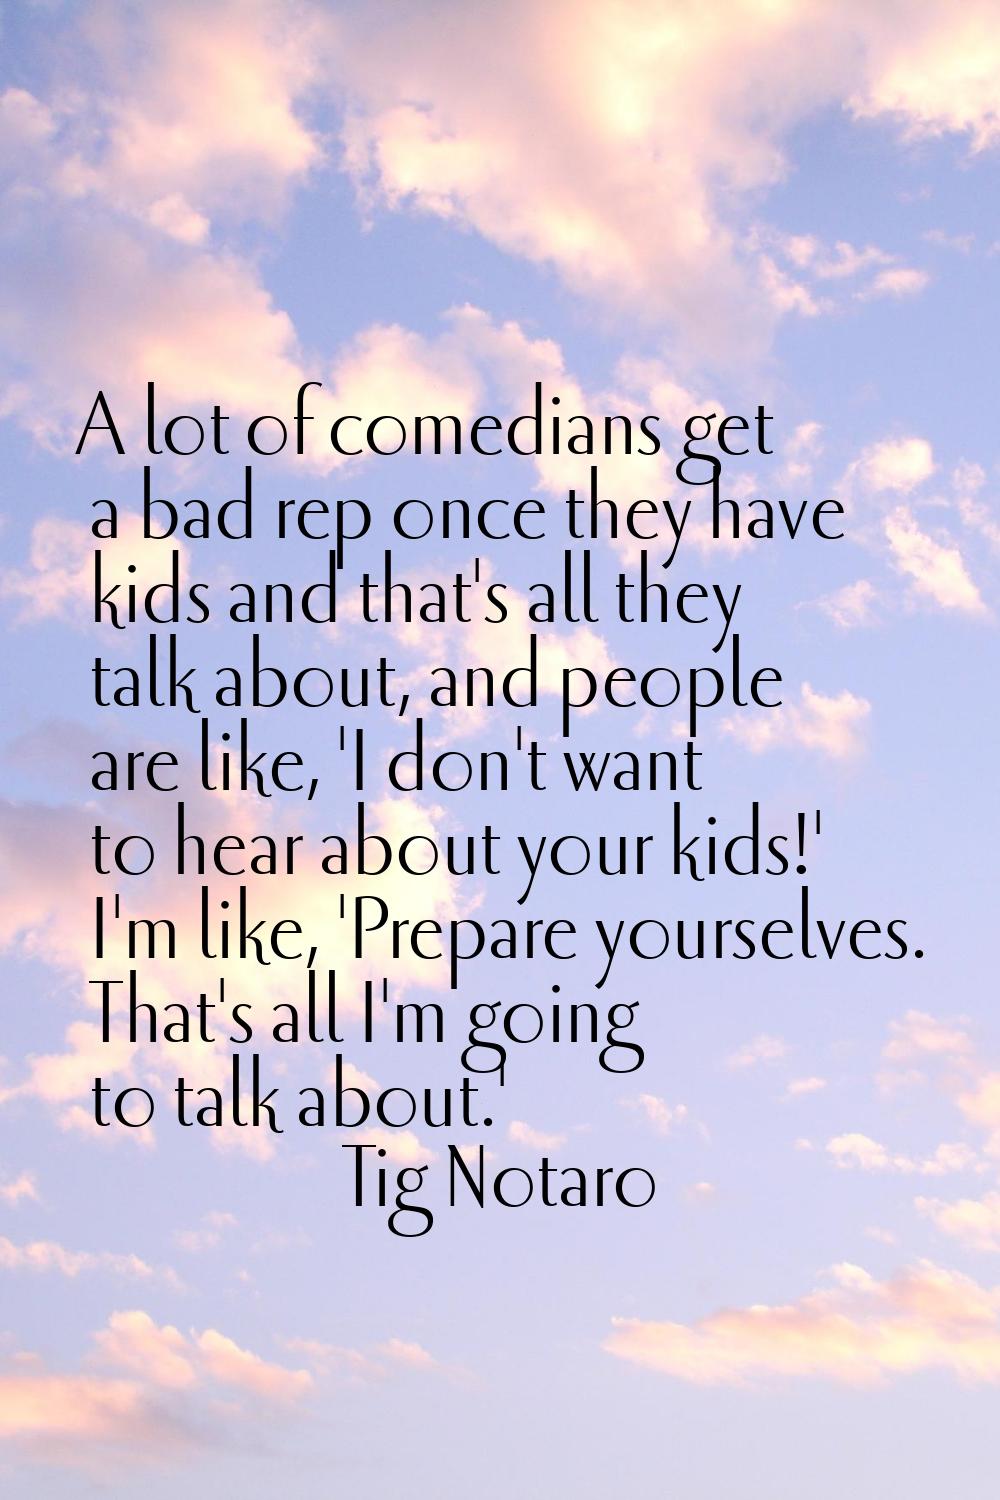 A lot of comedians get a bad rep once they have kids and that's all they talk about, and people are